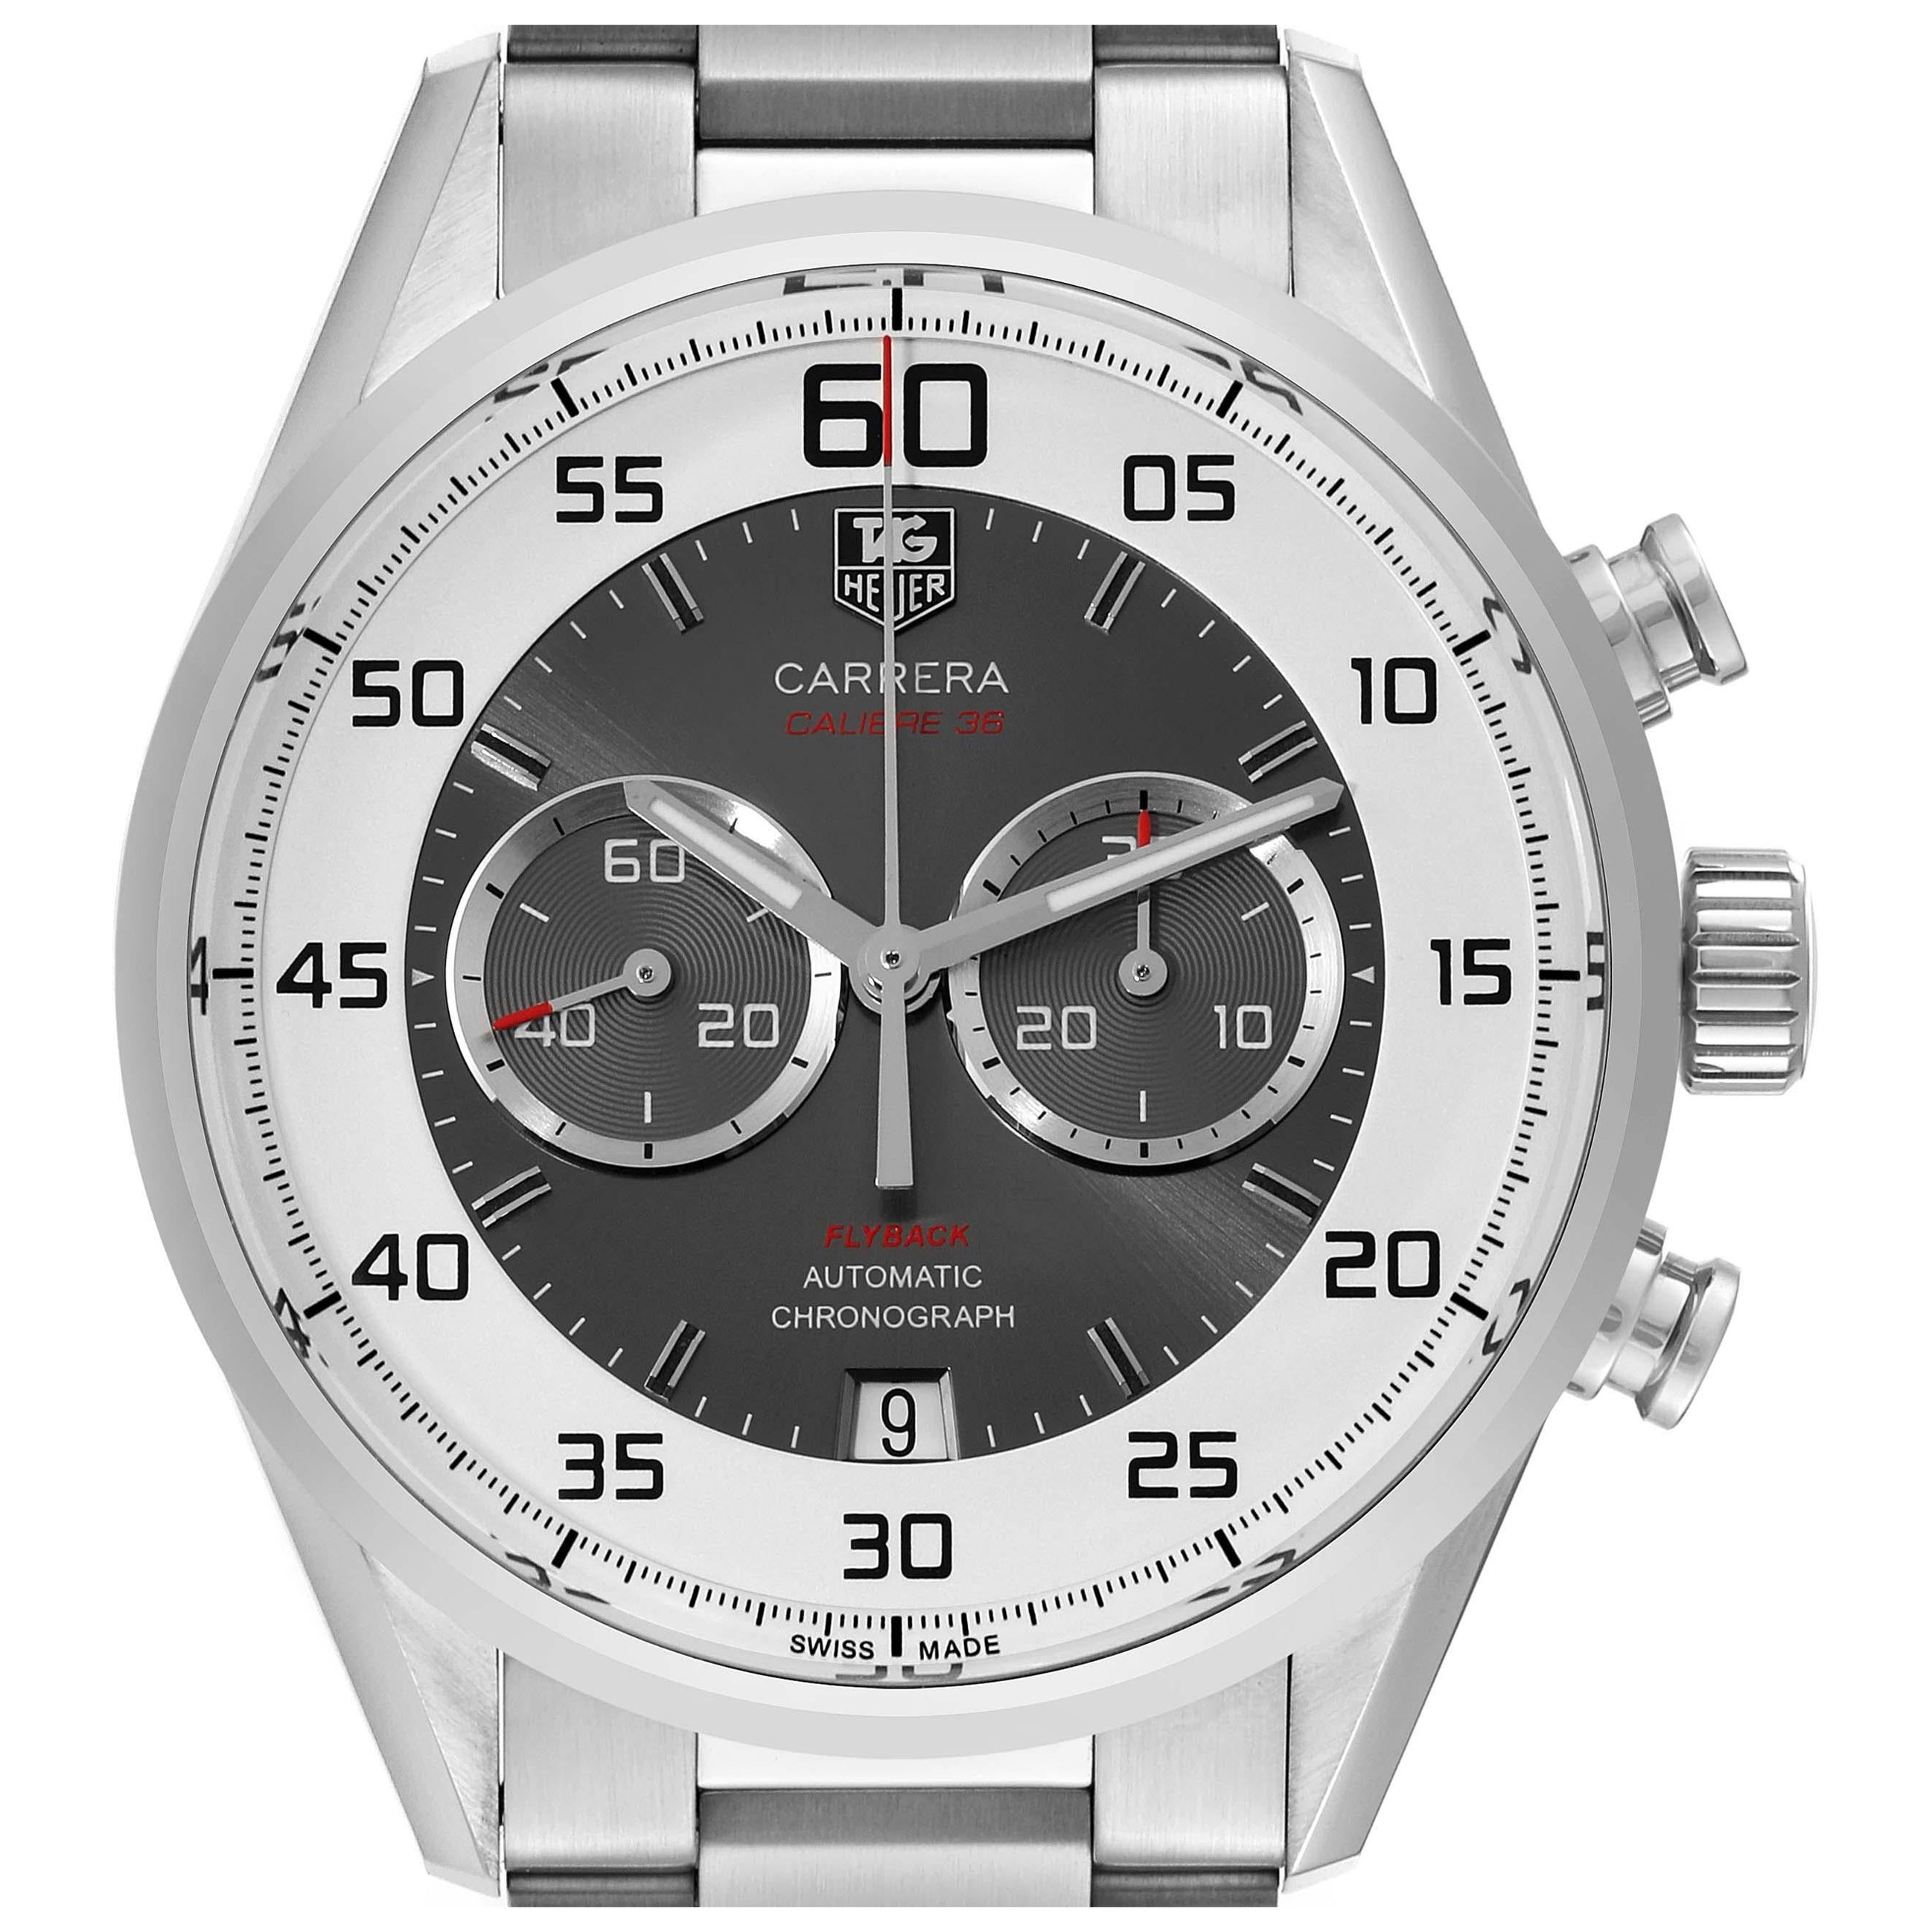 Tag Heuer Carrera Calibre 36 Flyback Steel Mens Watch CAR2B11 Box Card For Sale